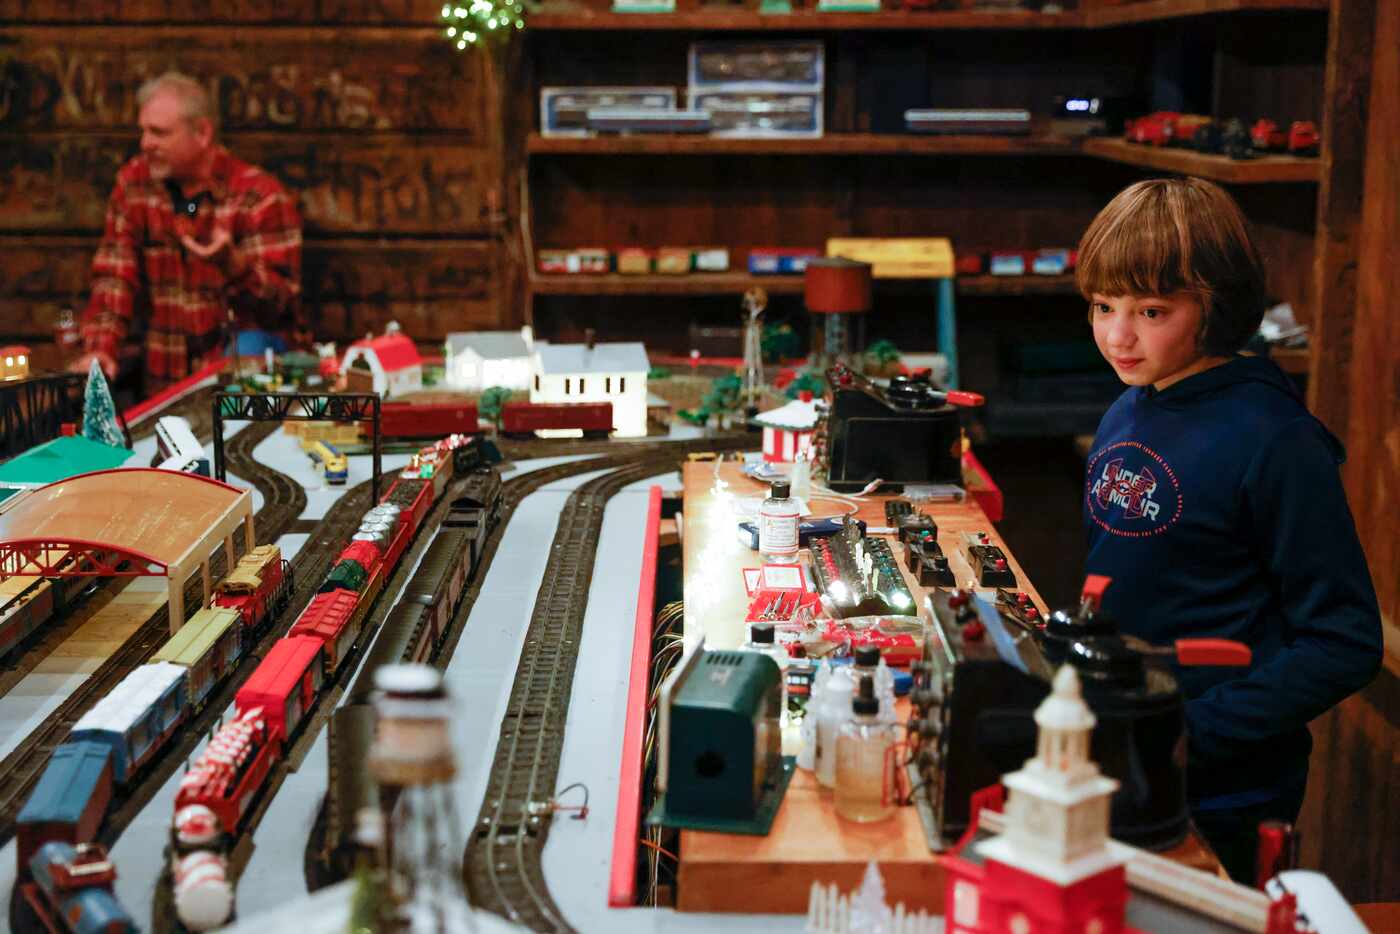 Garrett Clark, 11, watches as he operates the vintage toy train exhibit at Old City Park in...